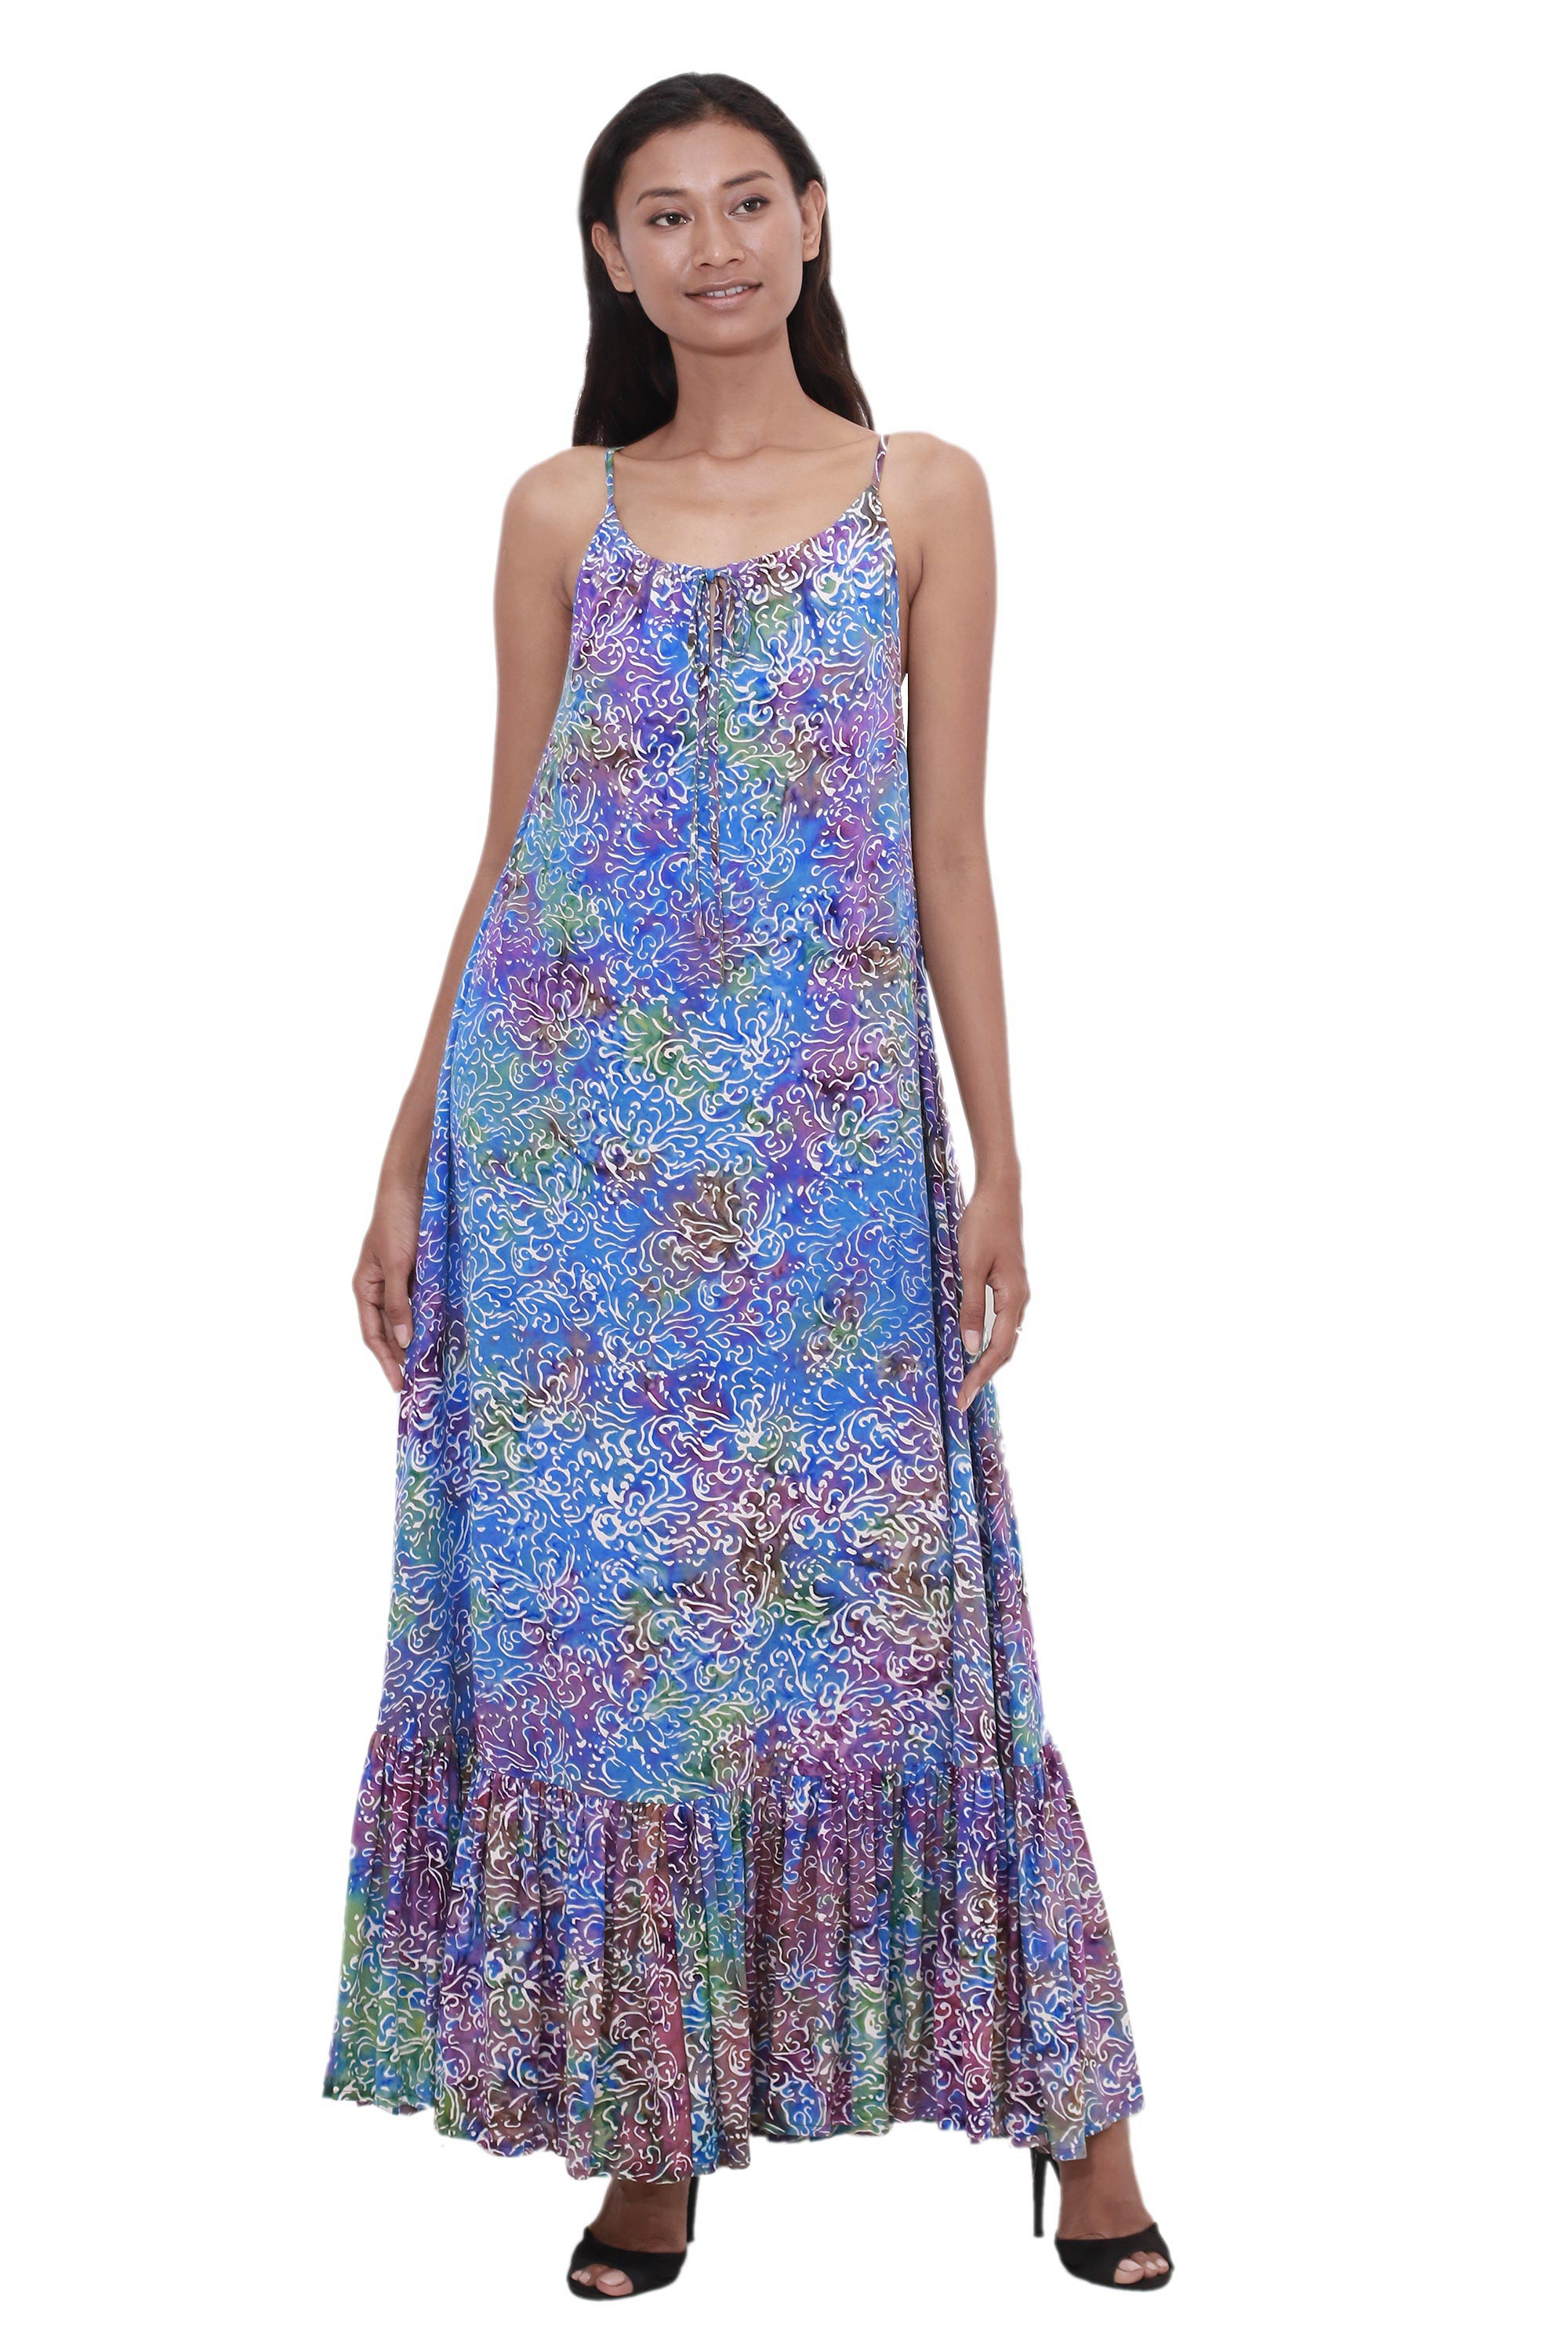 Colorful Hand-Stamped Batik Rayon Sundress from Bali - Rainbow Clouds ...